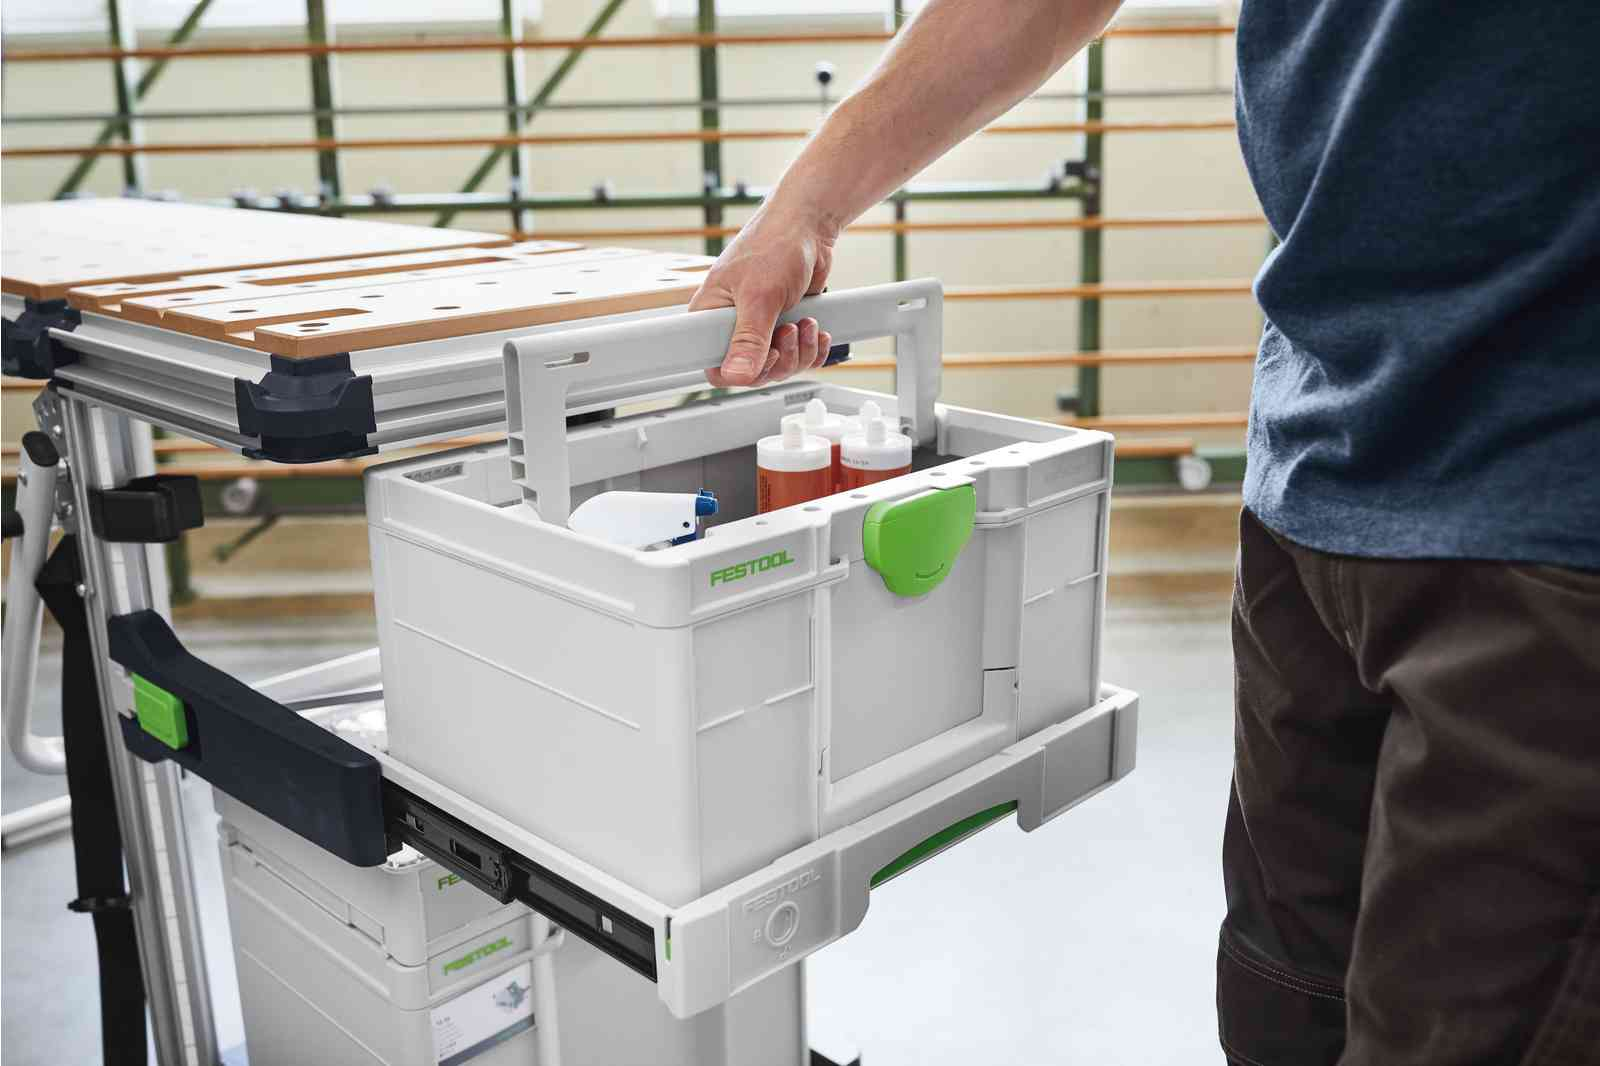 caisse-outils-toolbox-systainer-sys3-tb-m-237-204866-festool-1